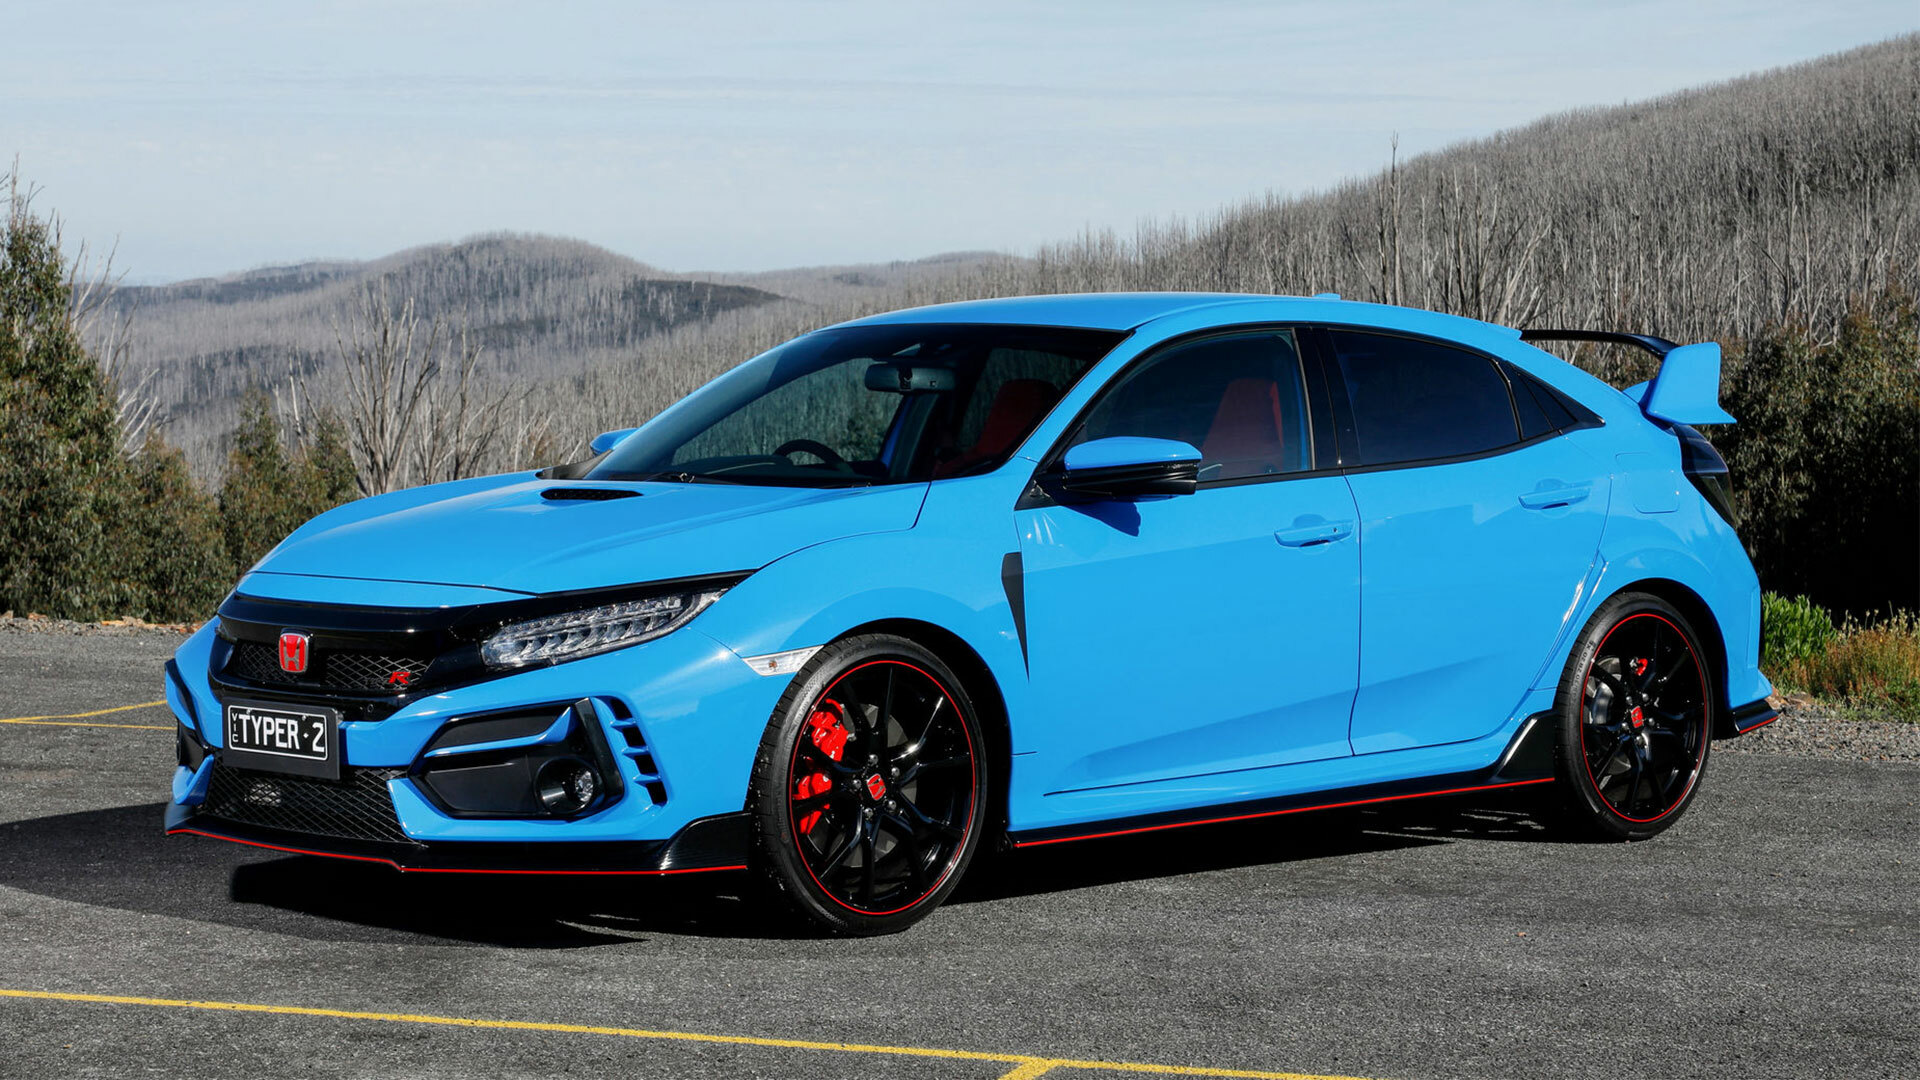 John Cena’s Daily Driver Is A Honda Civic Type R Carscoops